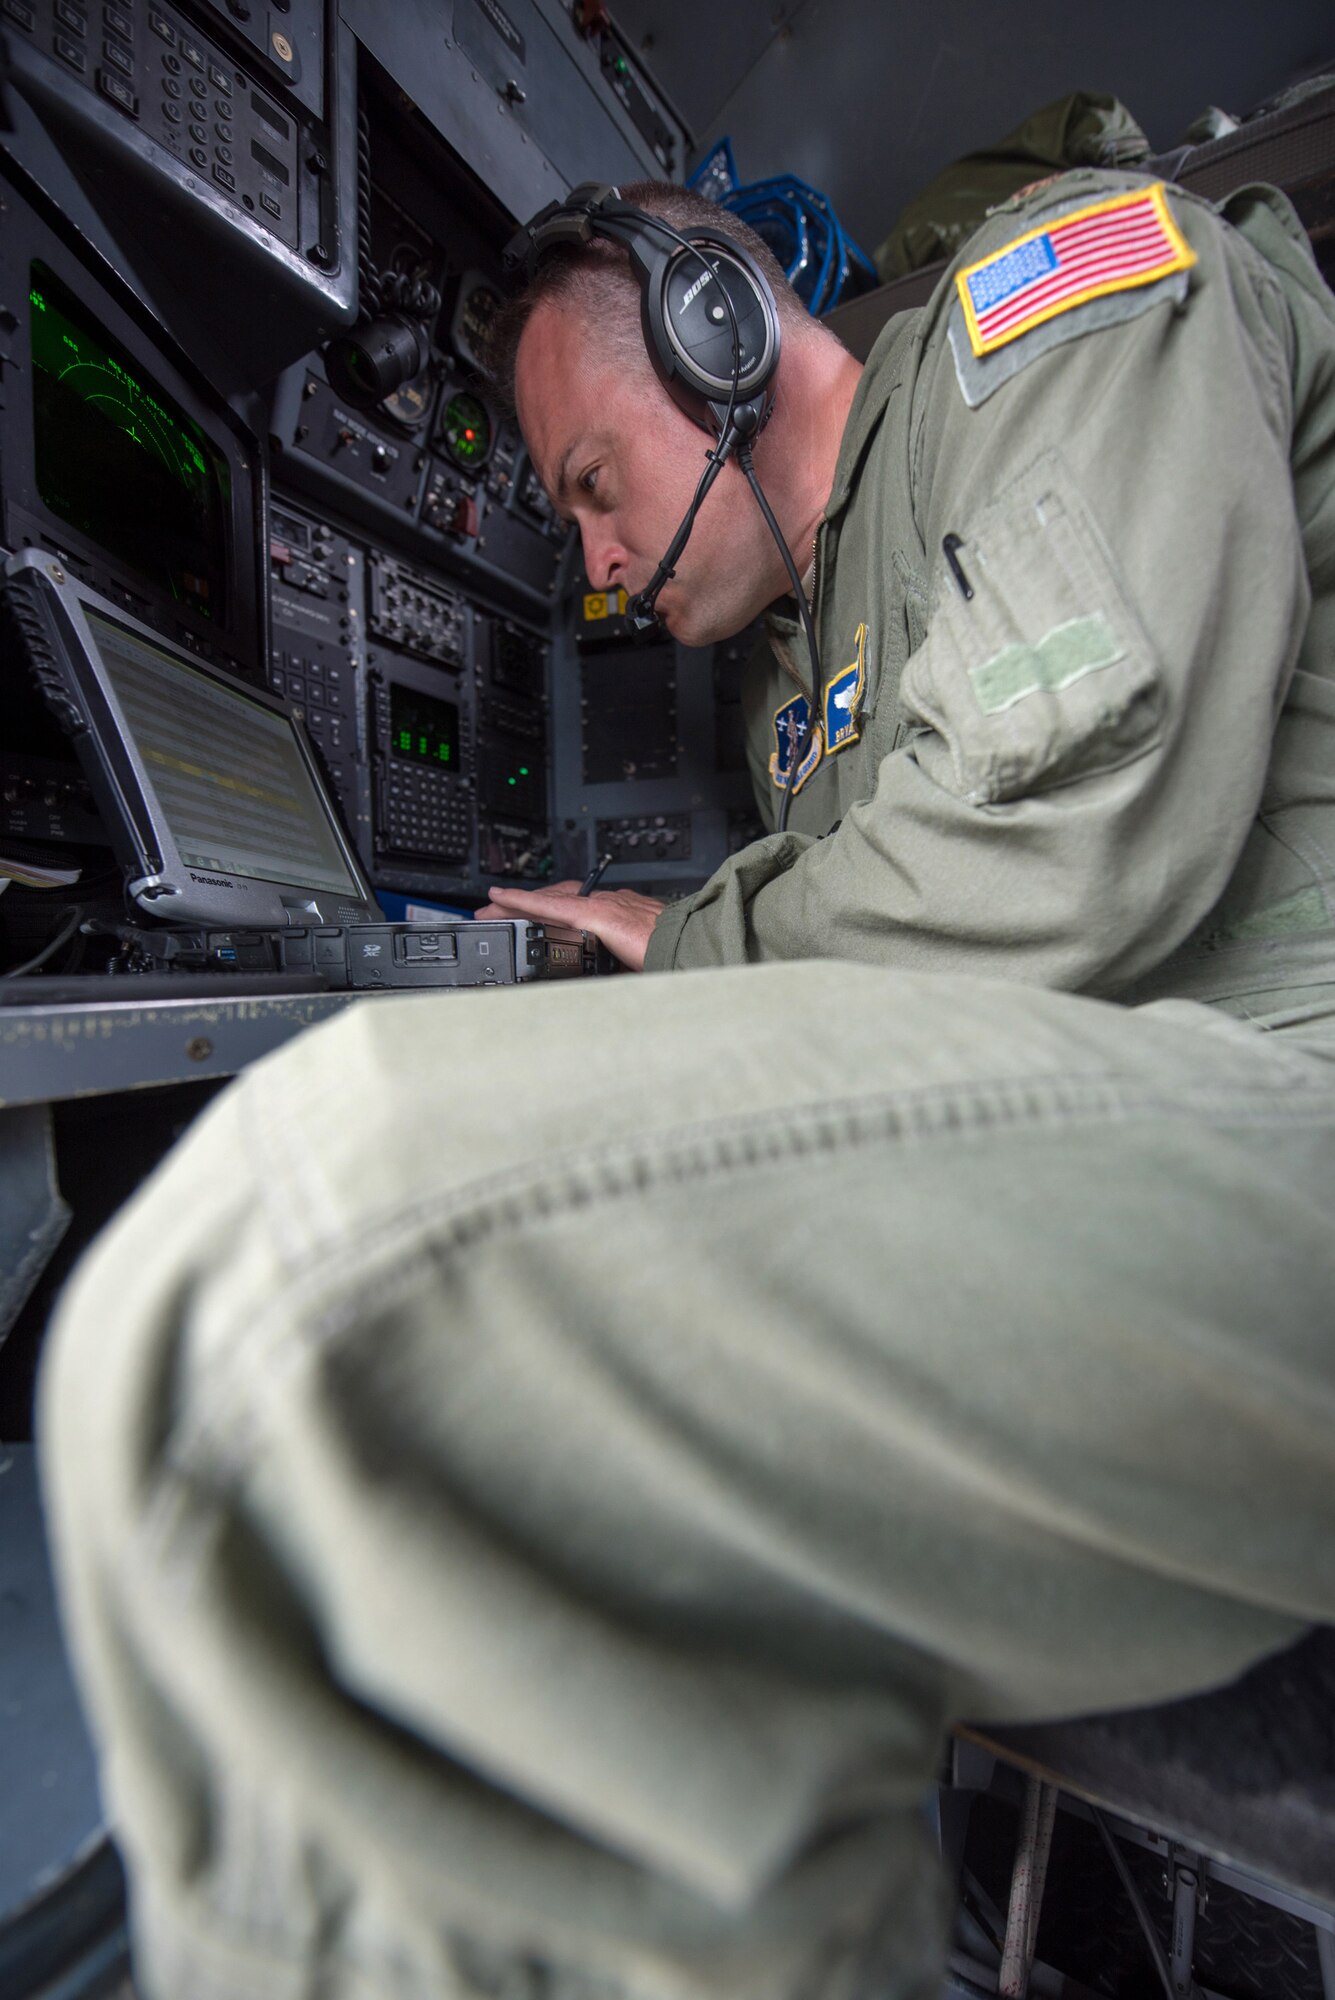 Maj. Bryan Keating, a navigator from the Kentucky Air National Guard's 165th Airlift Squadron, flies over the skies of Normandy, France, aboard a Kentucky Air Guard C-130 on June 4, 2019. Two C-130s and more than 30 Airmen from the Kentucky Air Guard’s 123rd Airlift Wing deployed from their base in Louisville, Ky., to participate in aerial events for the 75th anniversary of D-Day. The D-Day invasion, formally known as Operation Overlord, turned the tide of World War II in the European theater. (U.S. Air National Guard photo by Phil Speck)